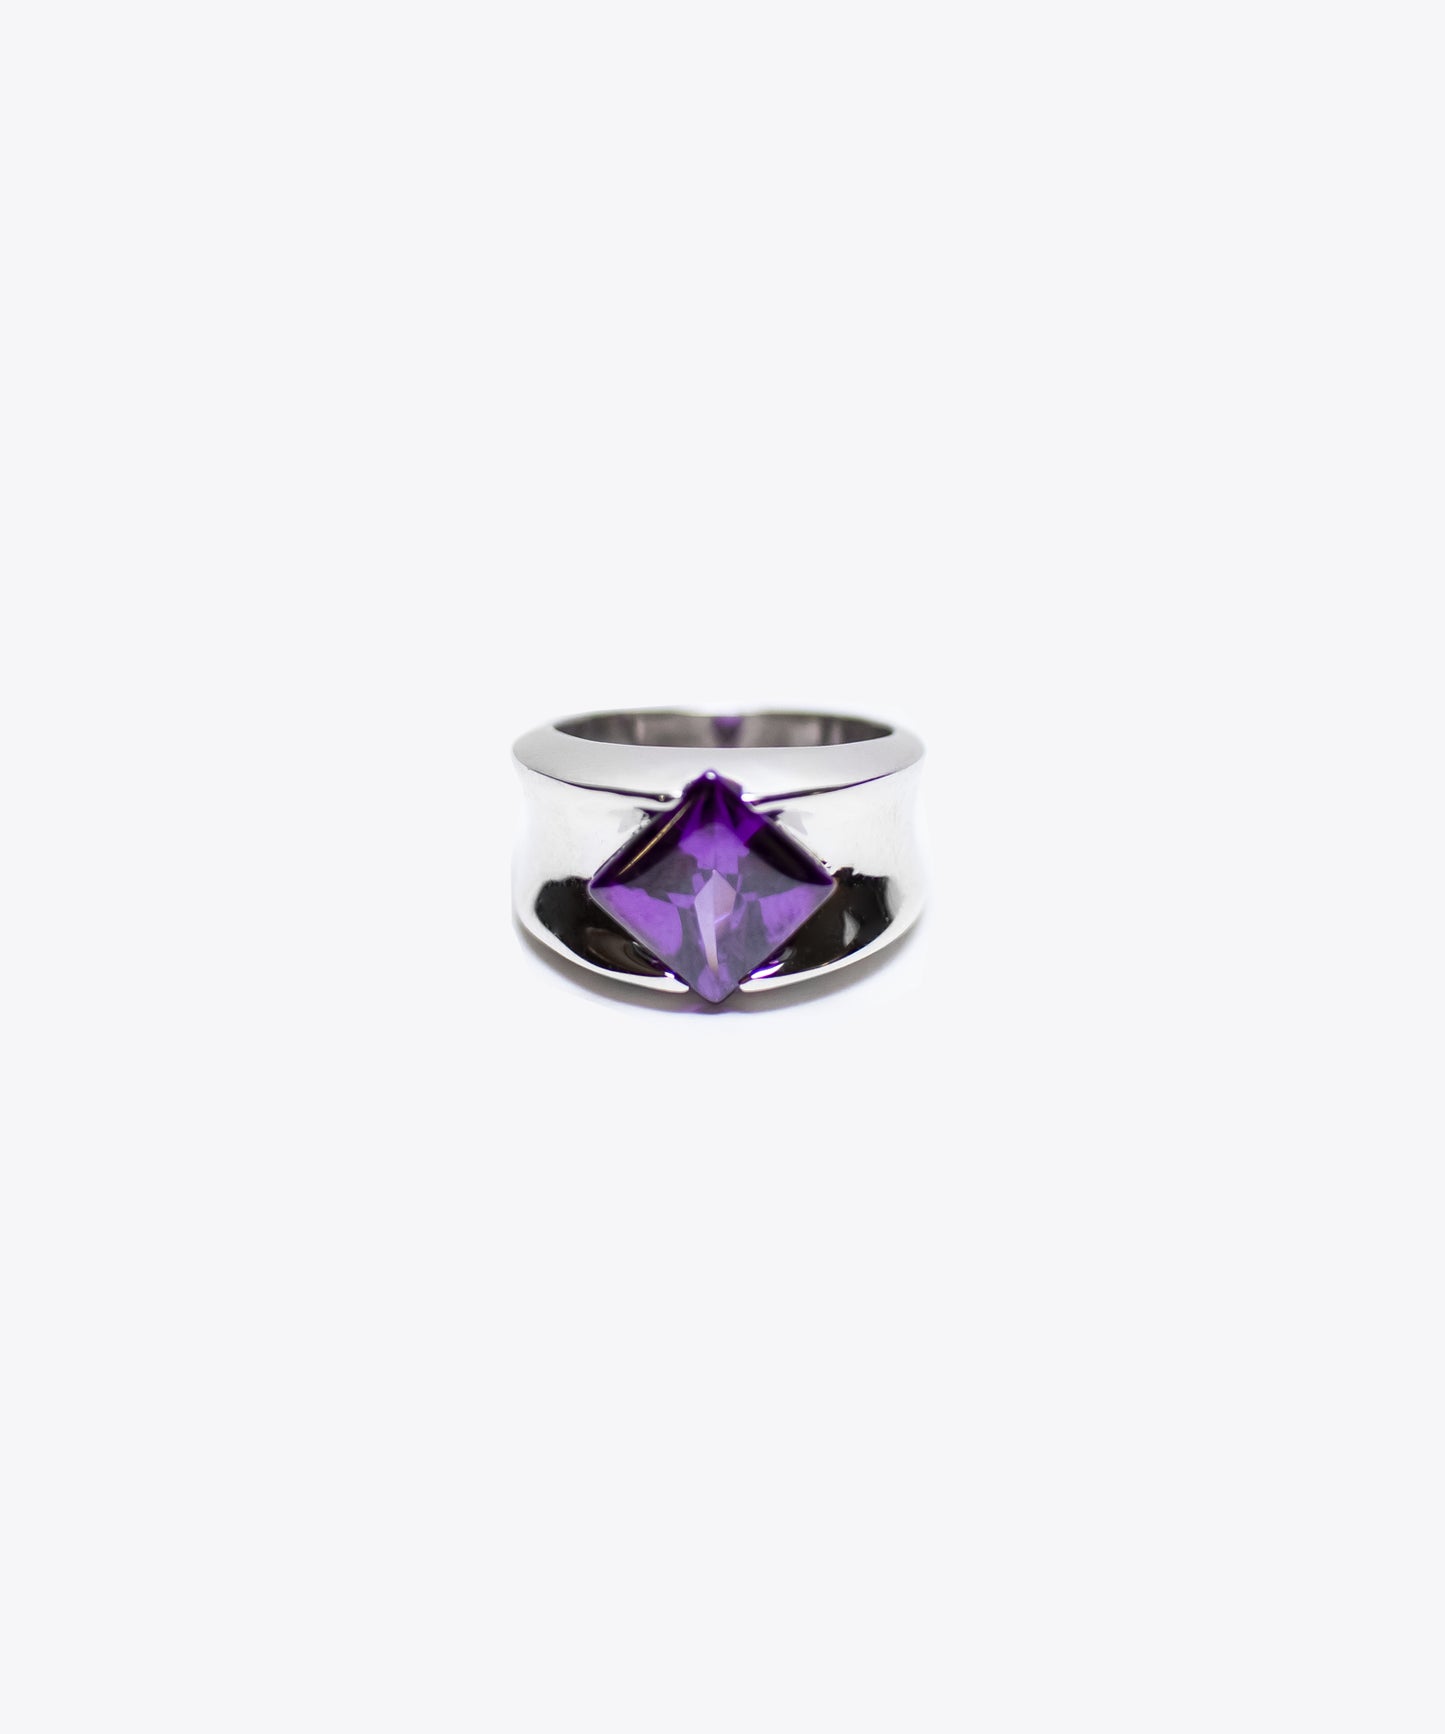 The Petro Violet Ring